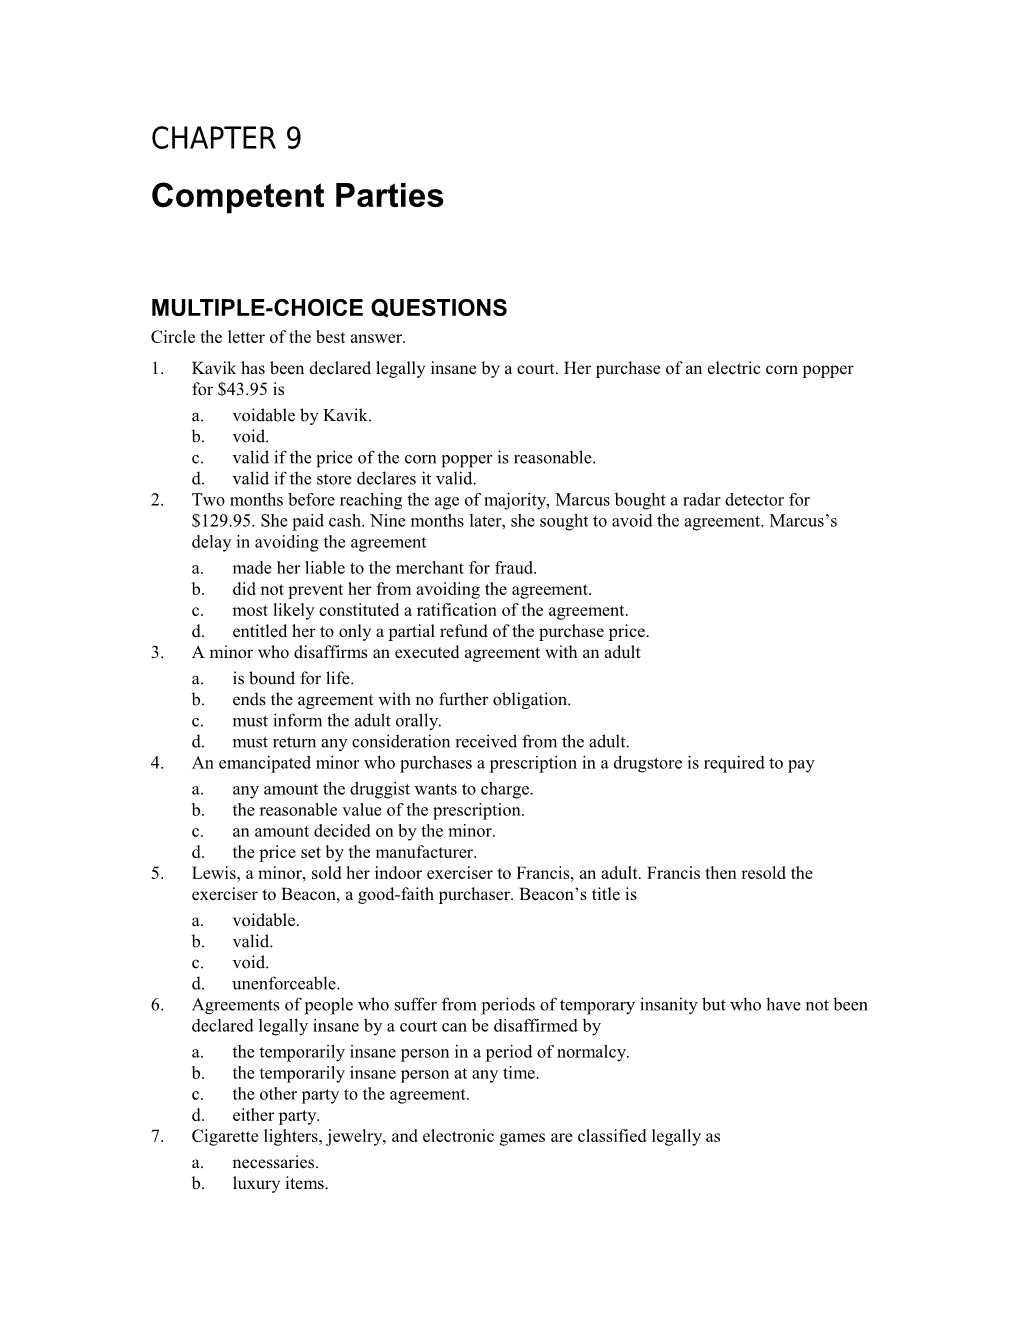 Competent Parties